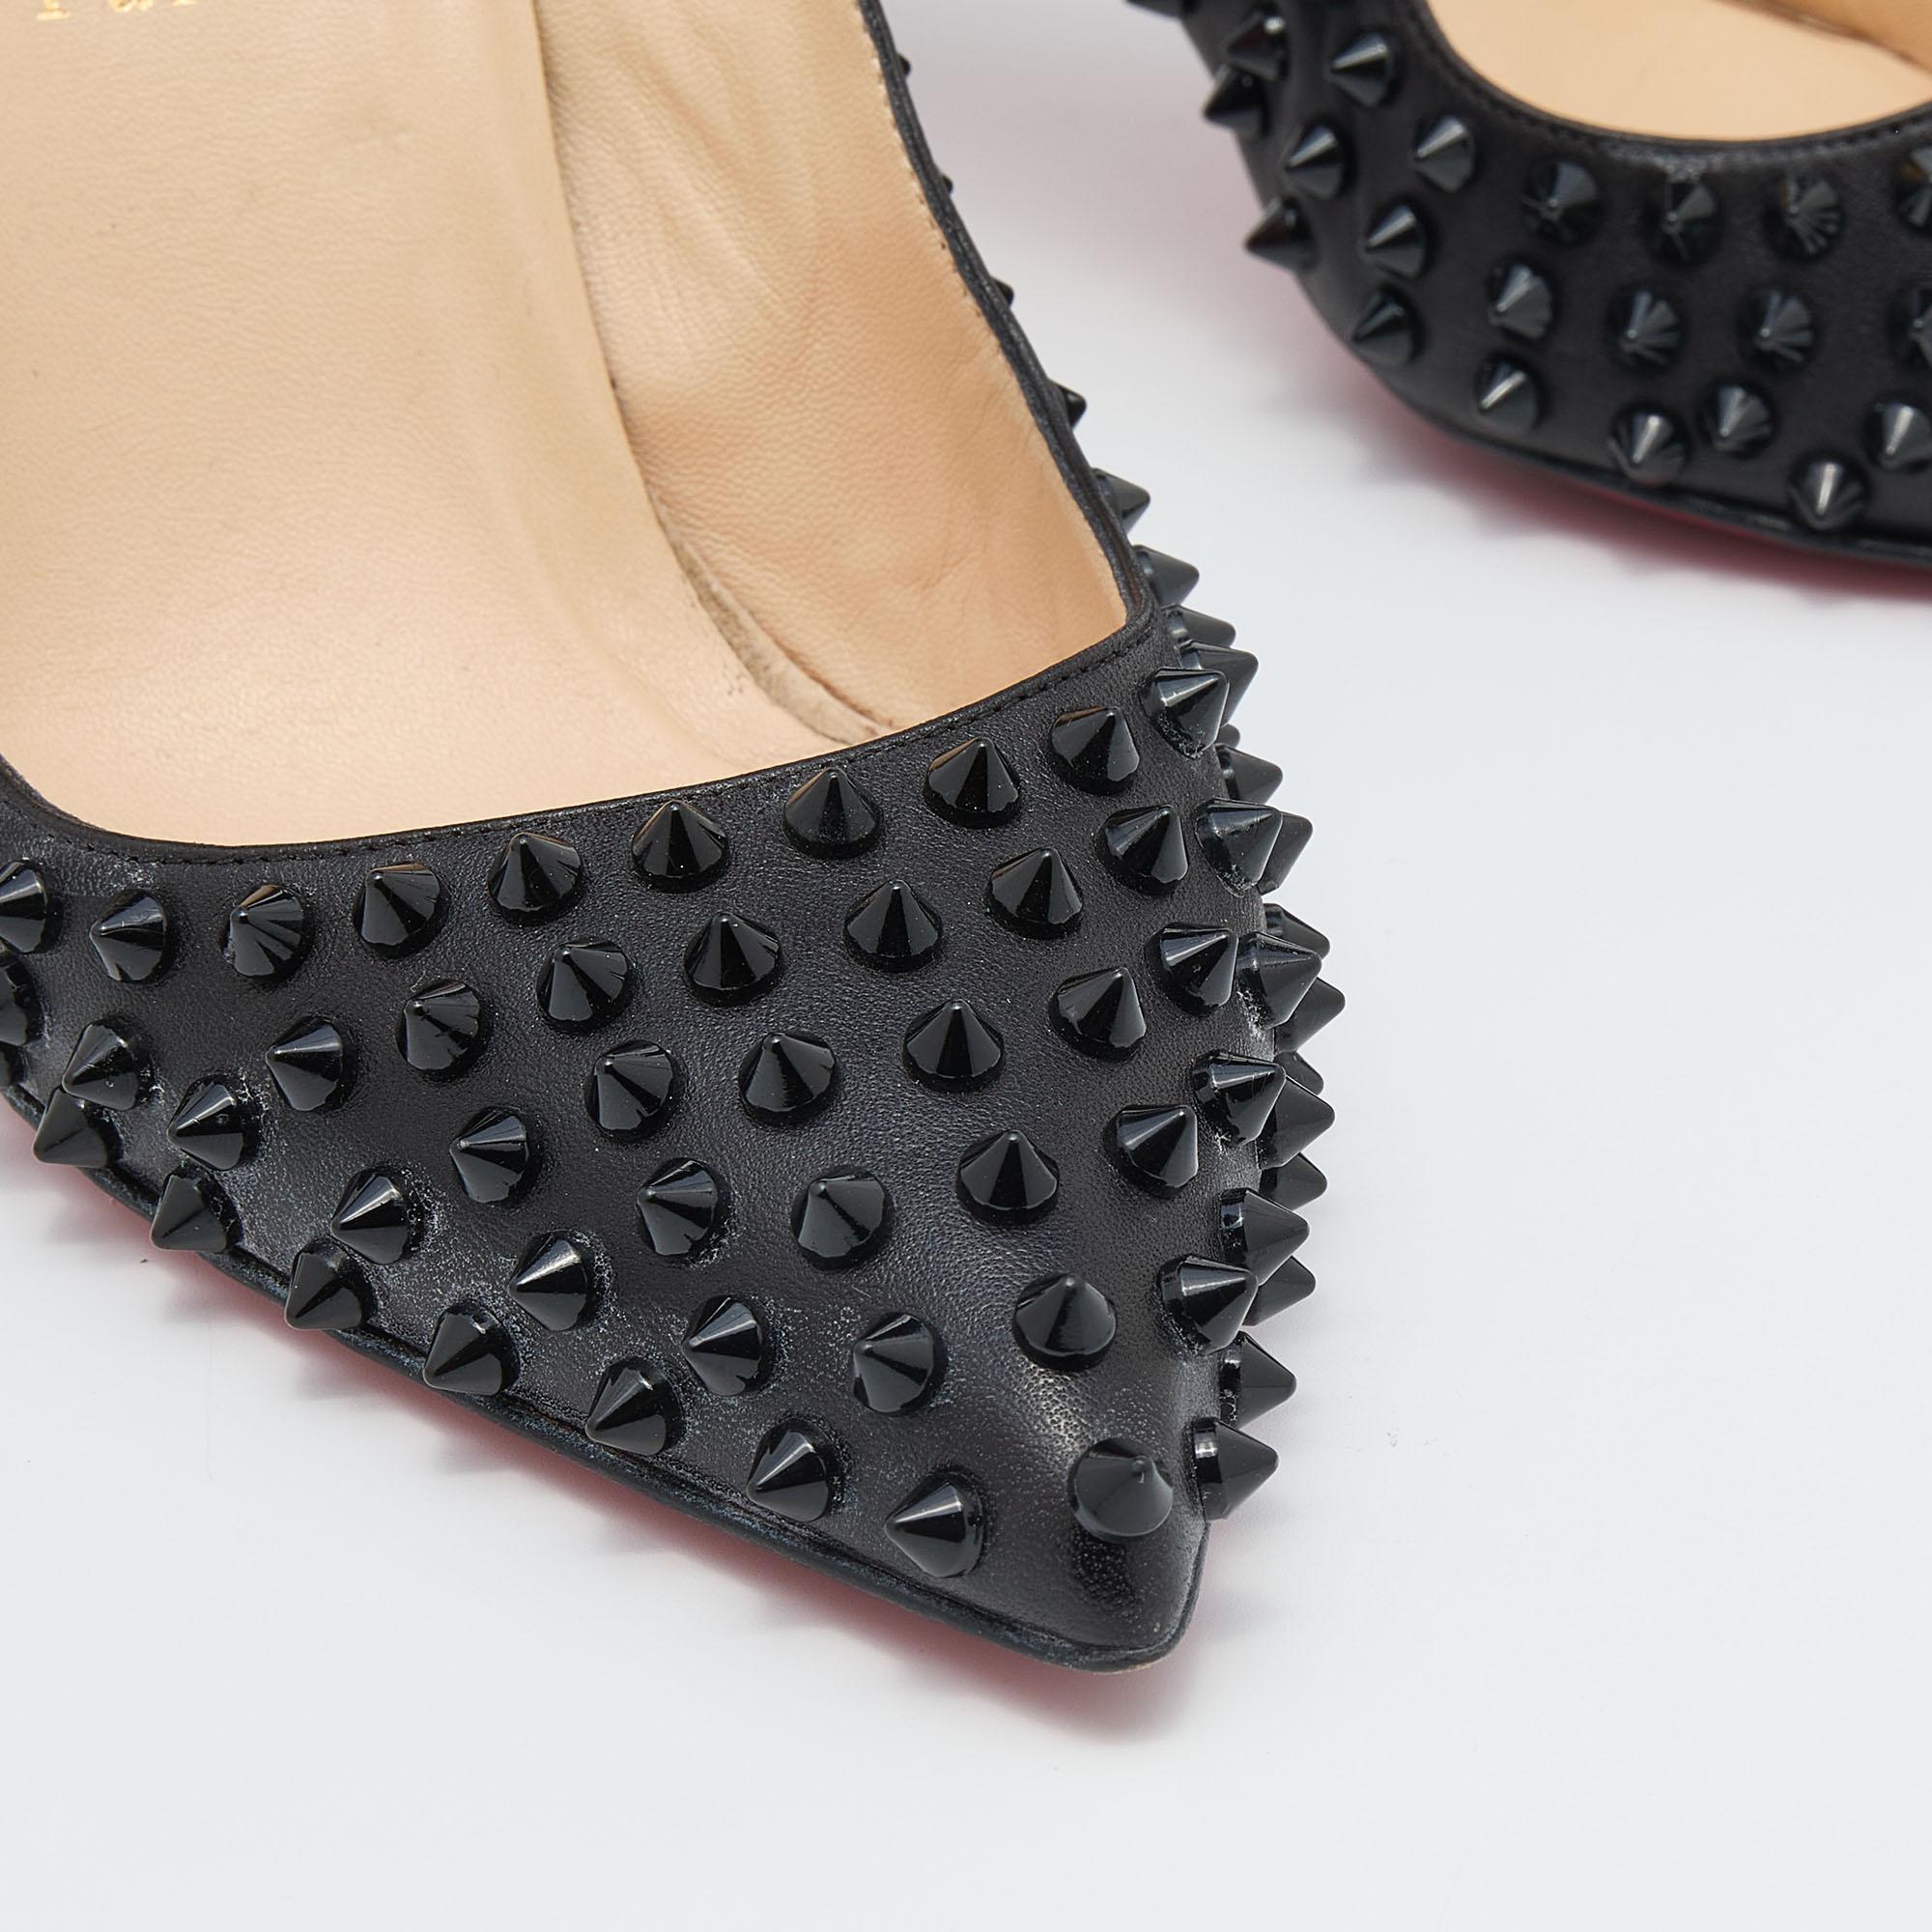 Women's Christian Louboutin Black Leather Pigalle Spikes Pumps Size 41